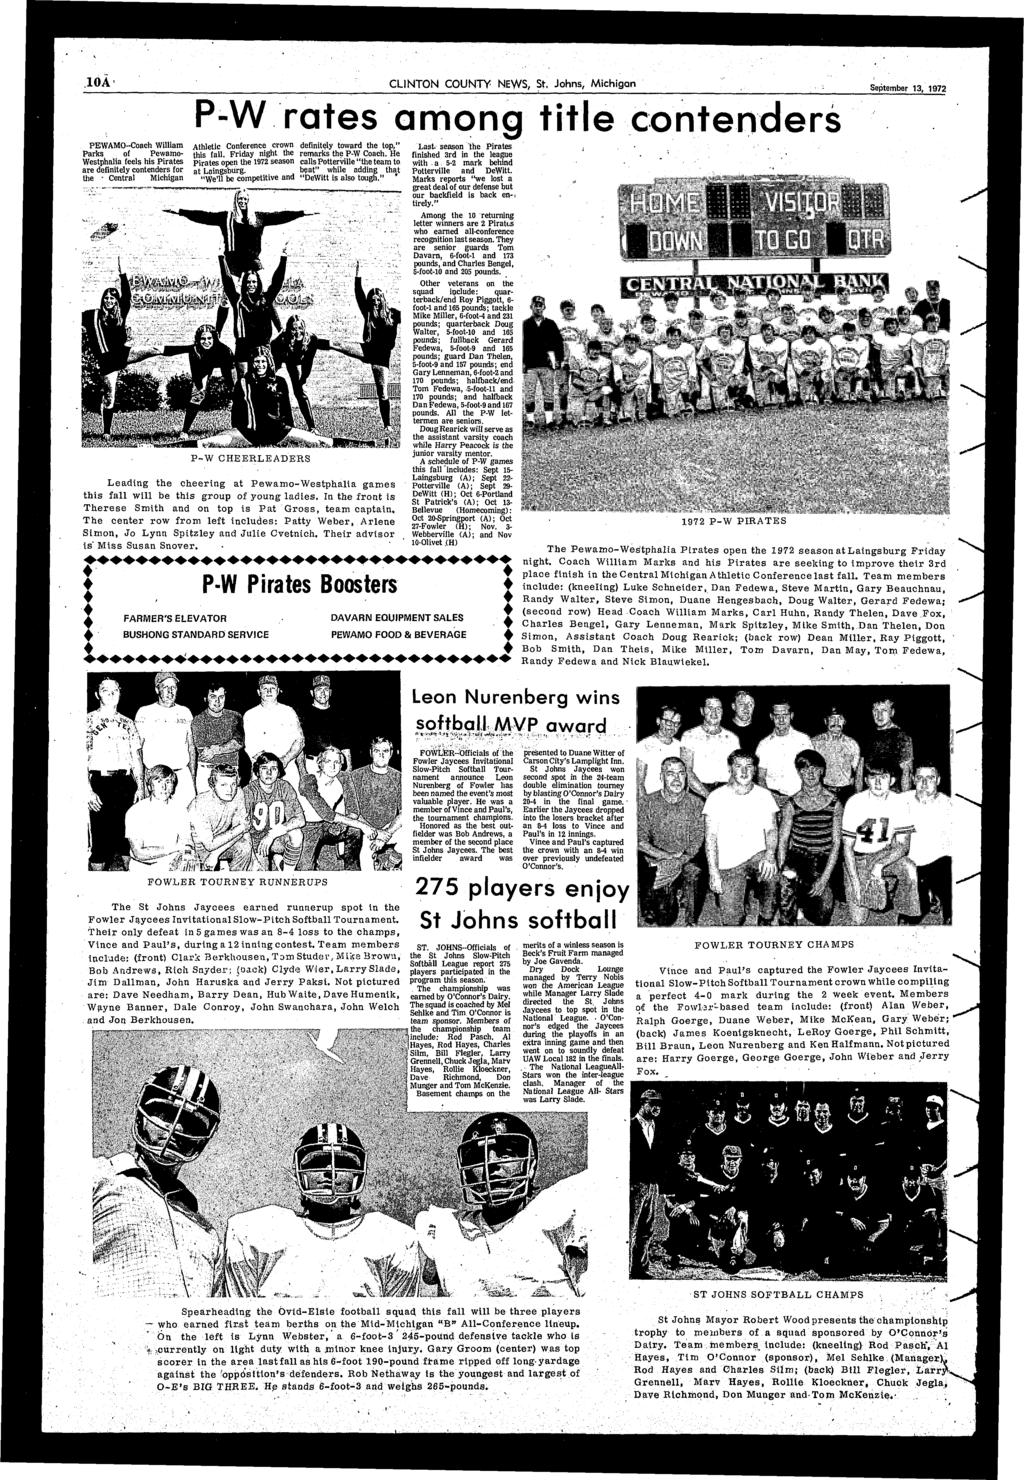 10A CLINTON COUNTY NEWS, St Johns, Michigan September 13, 1972 PEWAMO--Coach William Parks of Fewamo- Westphalia feels his Pirates are definitely contenders for the - Central Michigan P-W rates amona